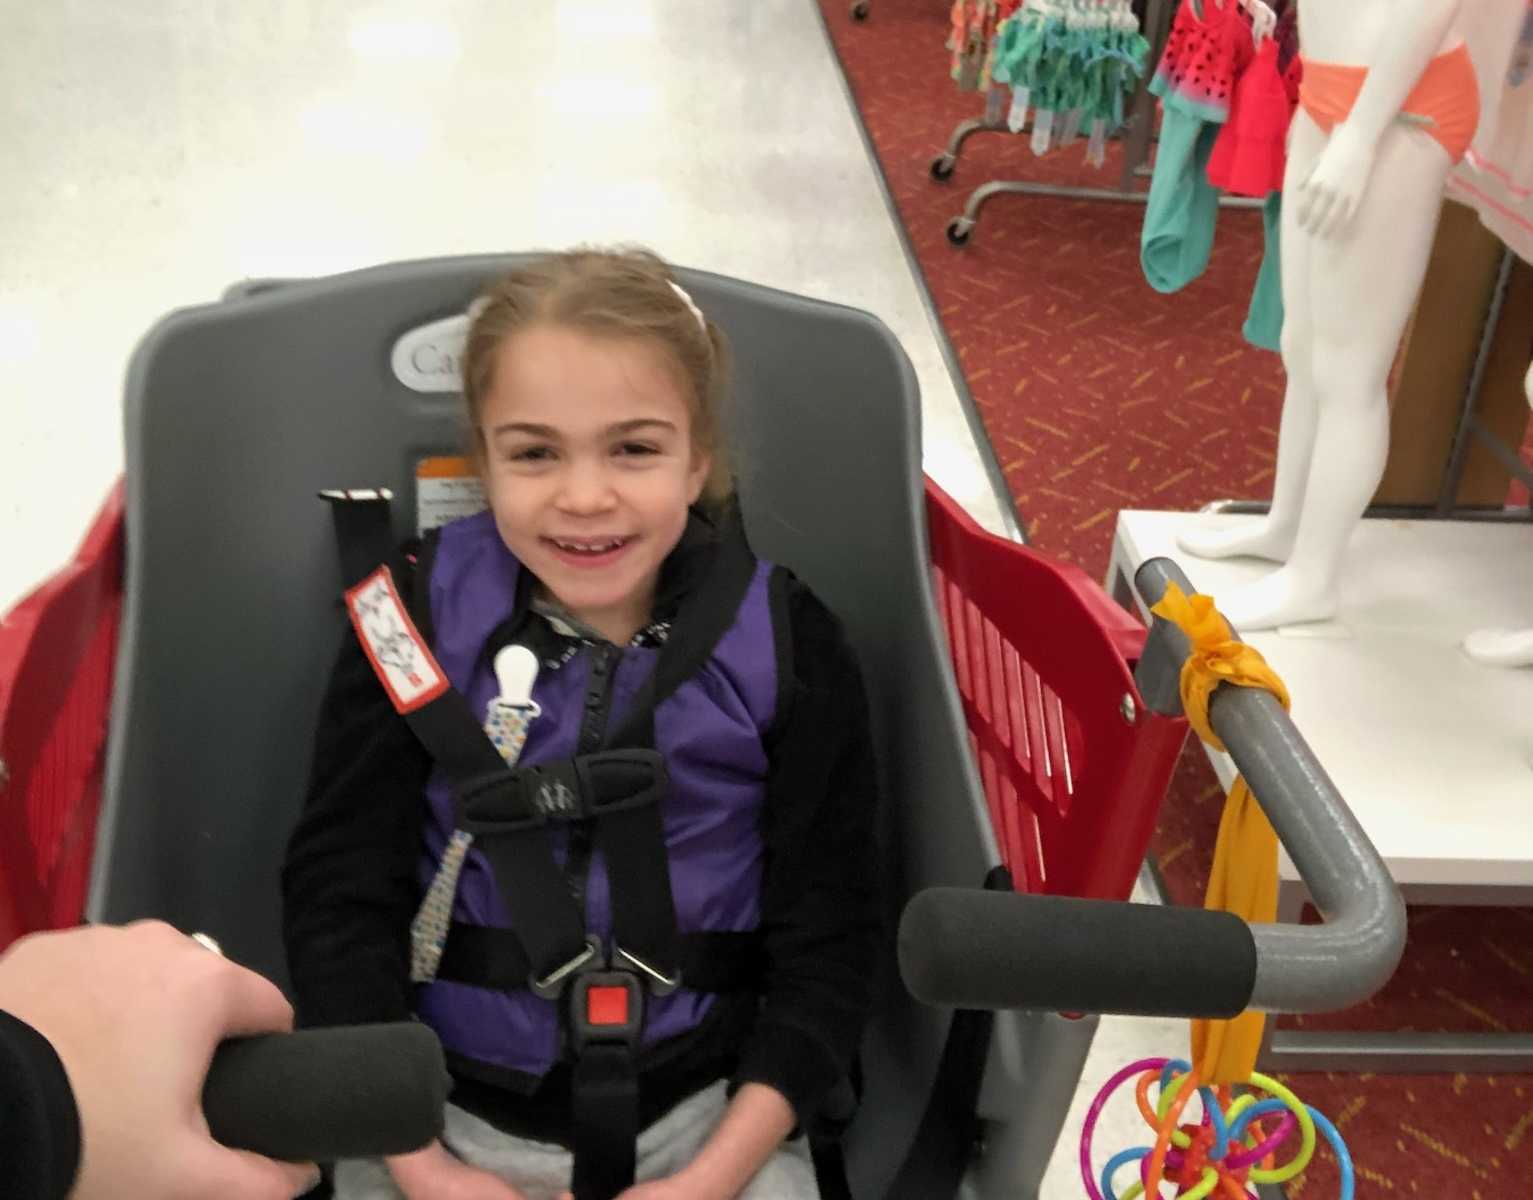 young girl with terminal illness looks up smiling while she is being pushed in target shopping cart